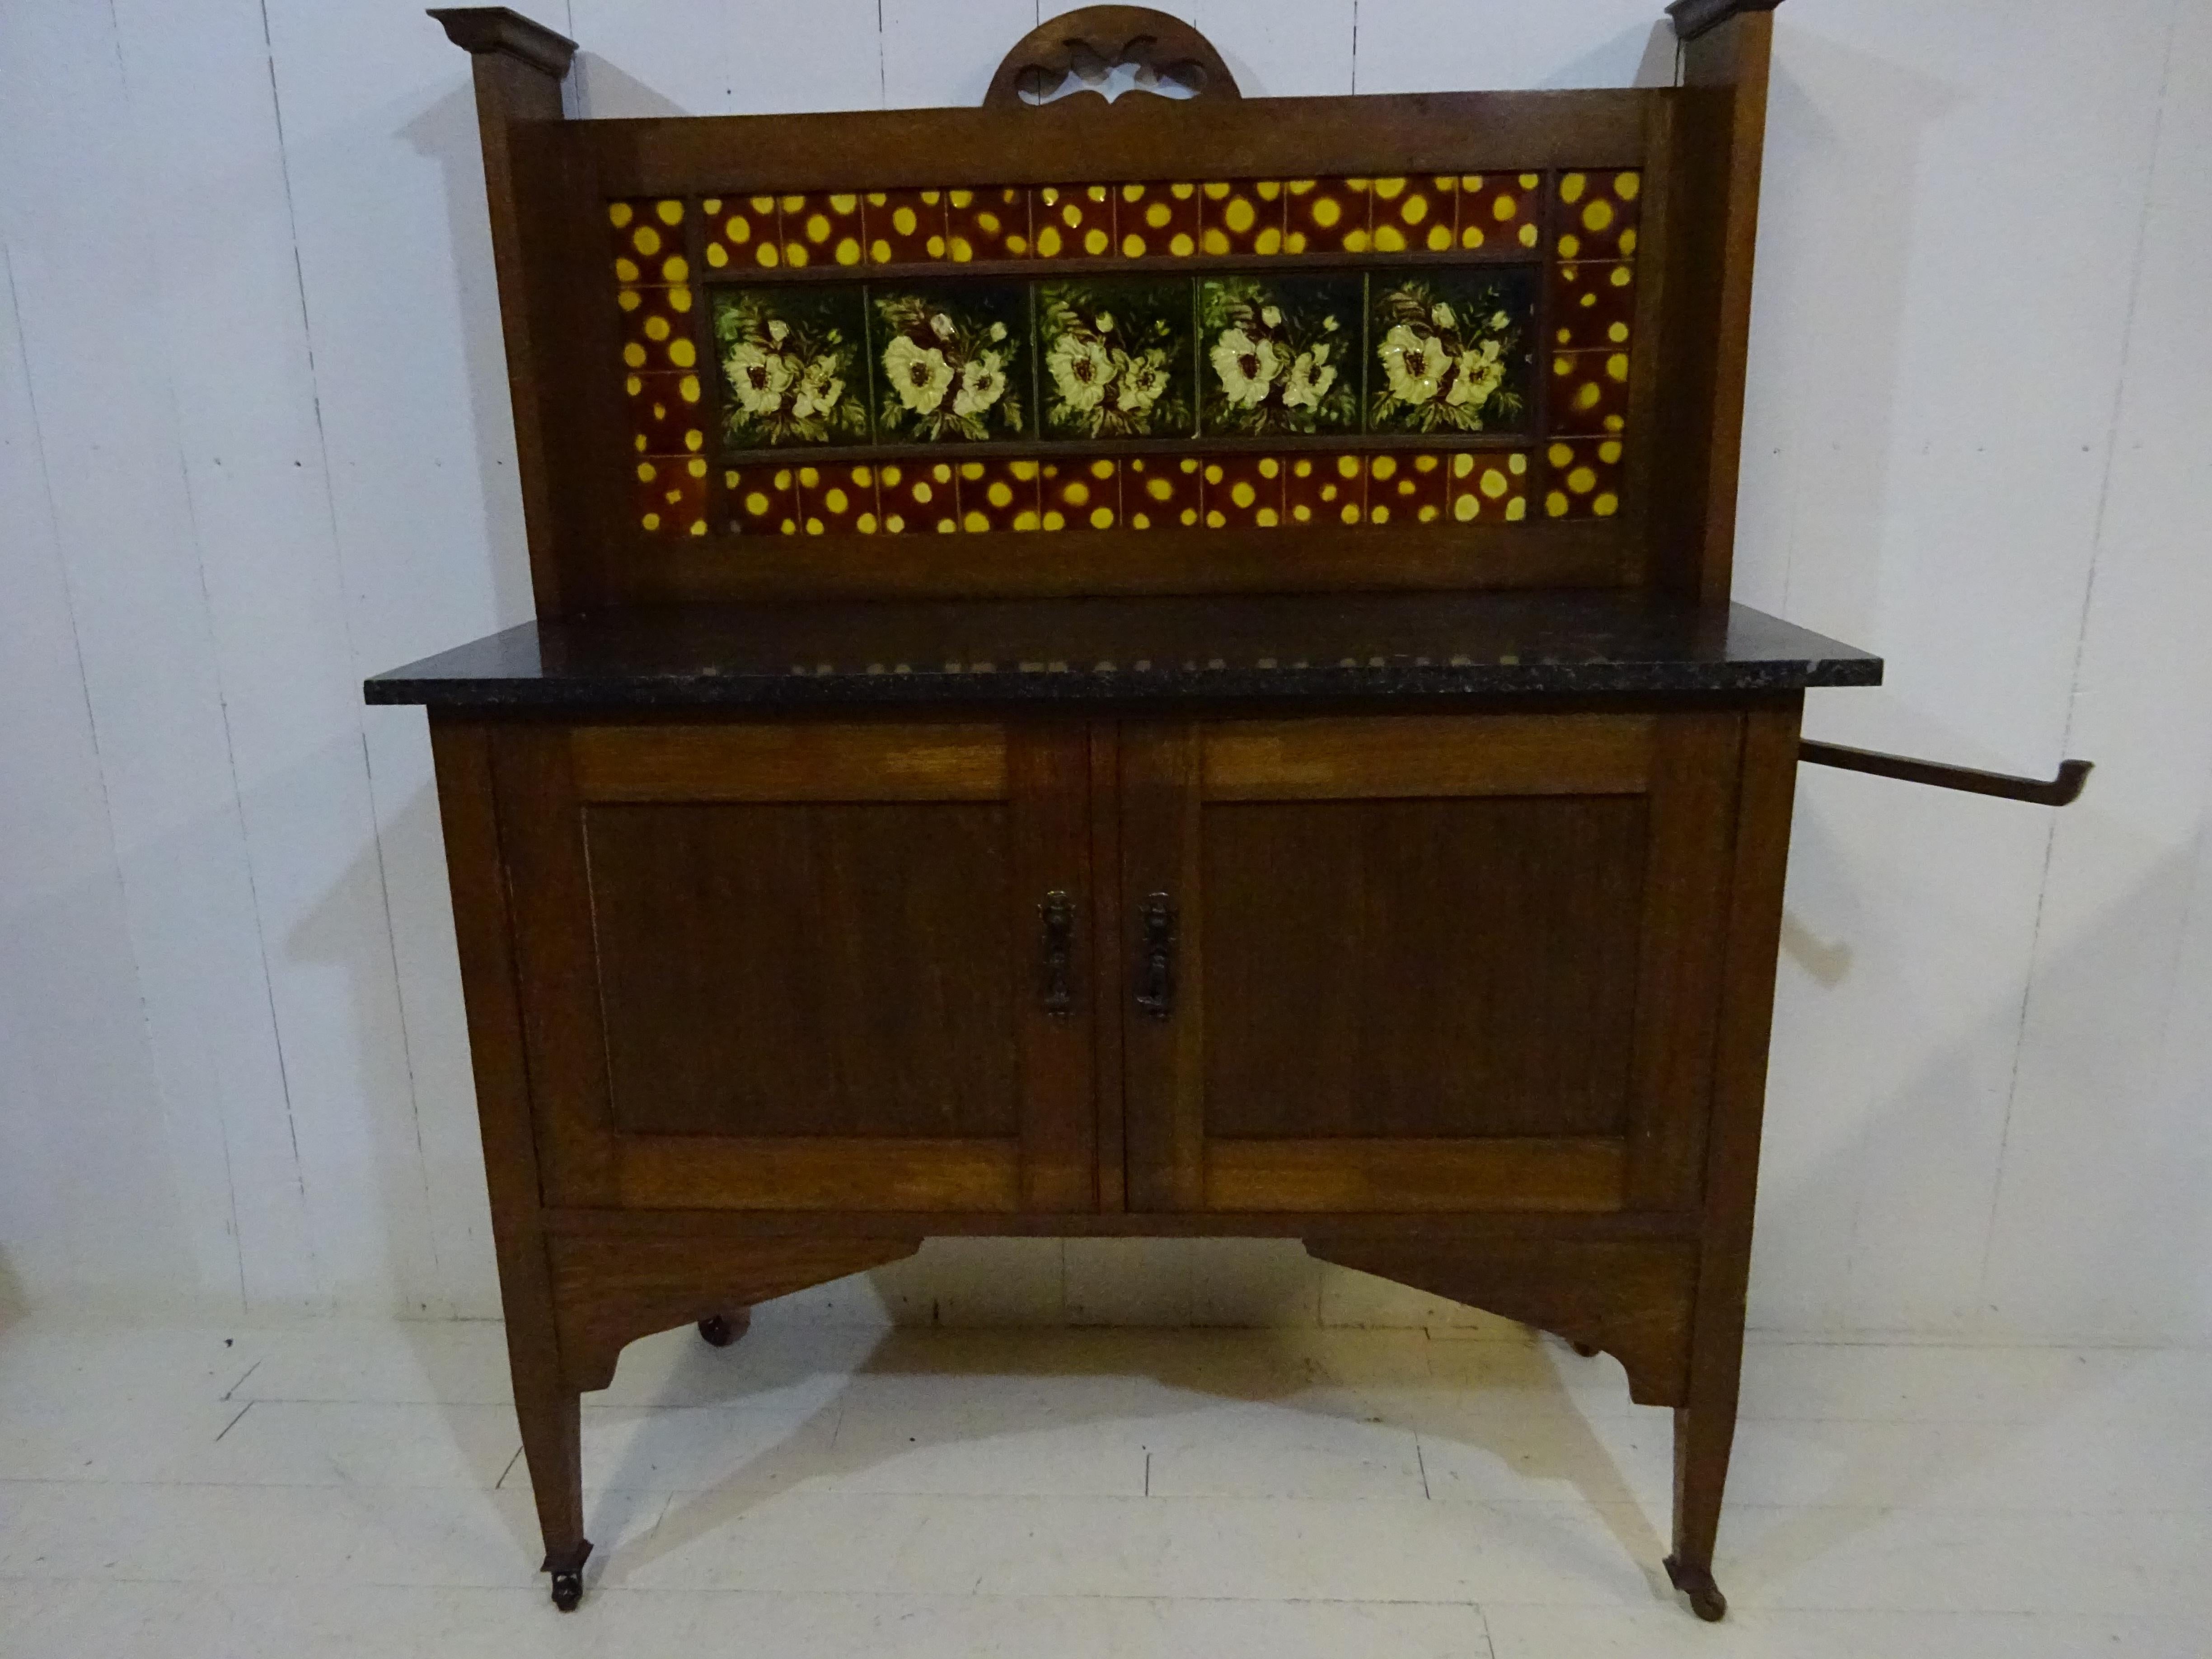 Victorian Marble Top Wash Stand in Oak with Floral Glazed Tiles 6